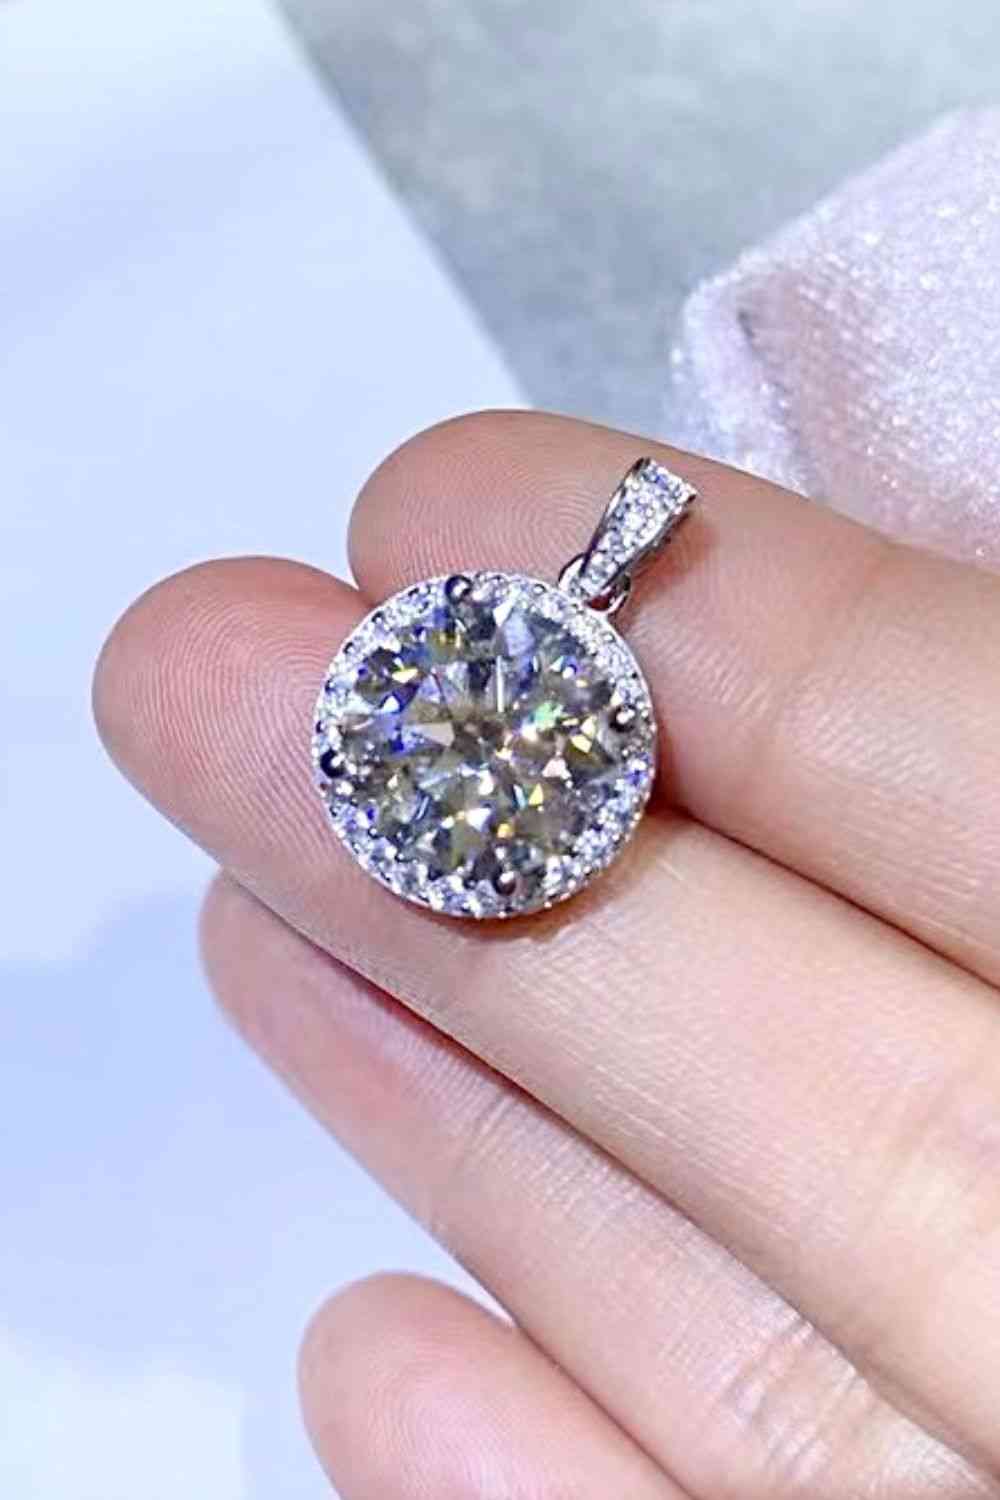 10 carate green moissanite pendant in sterling silver setting